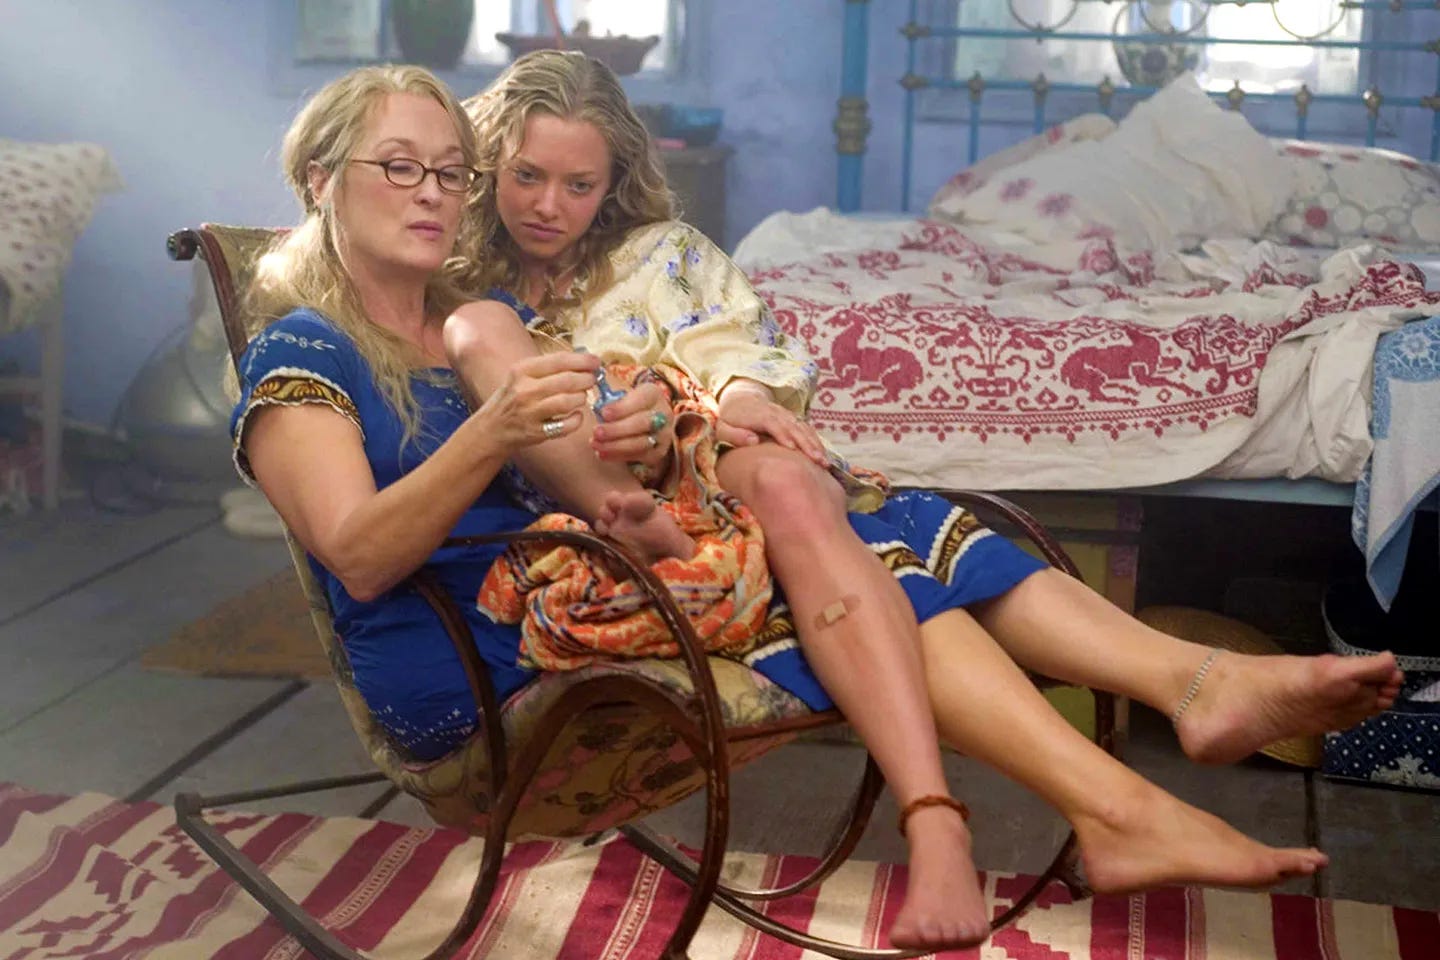 Meryl Streep and Amanda Seyfried as Donna and Sophie Sheridan during Slipping Through My Fingers in Mamma Mia!